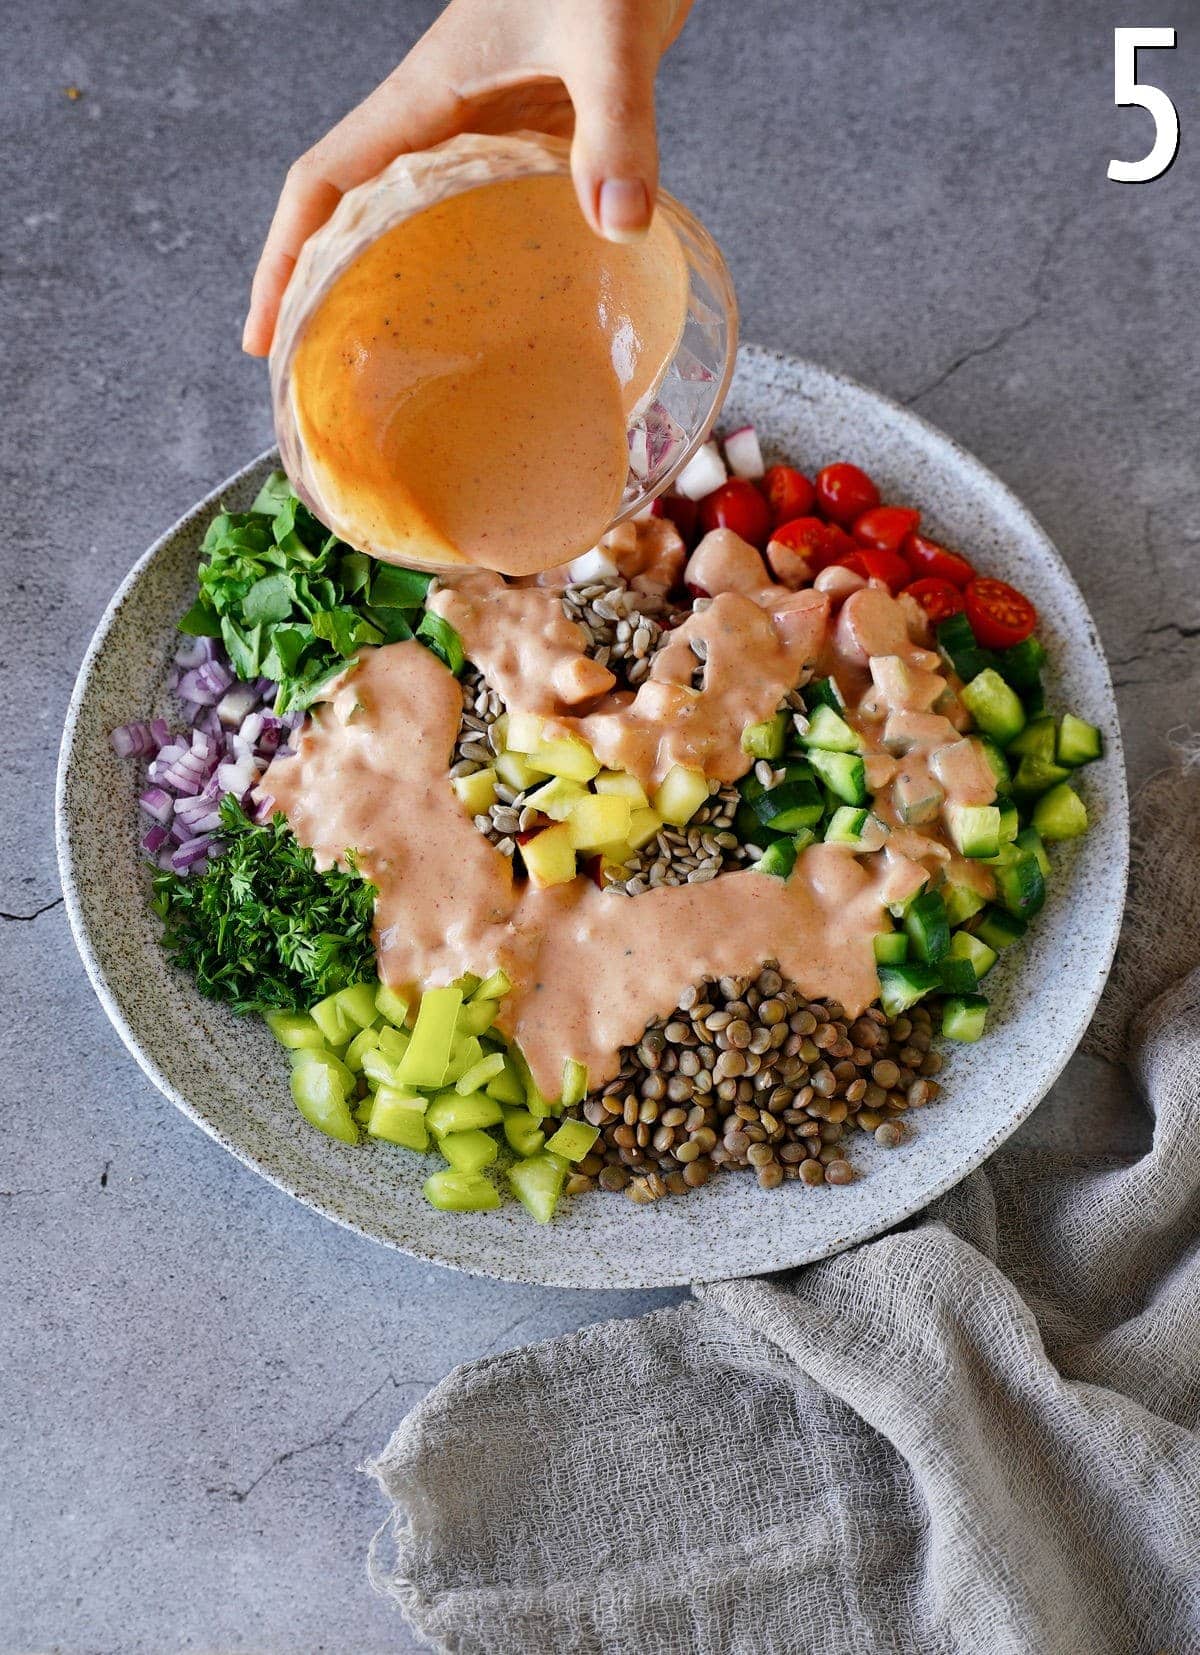 pouring dressing over salad with lentils